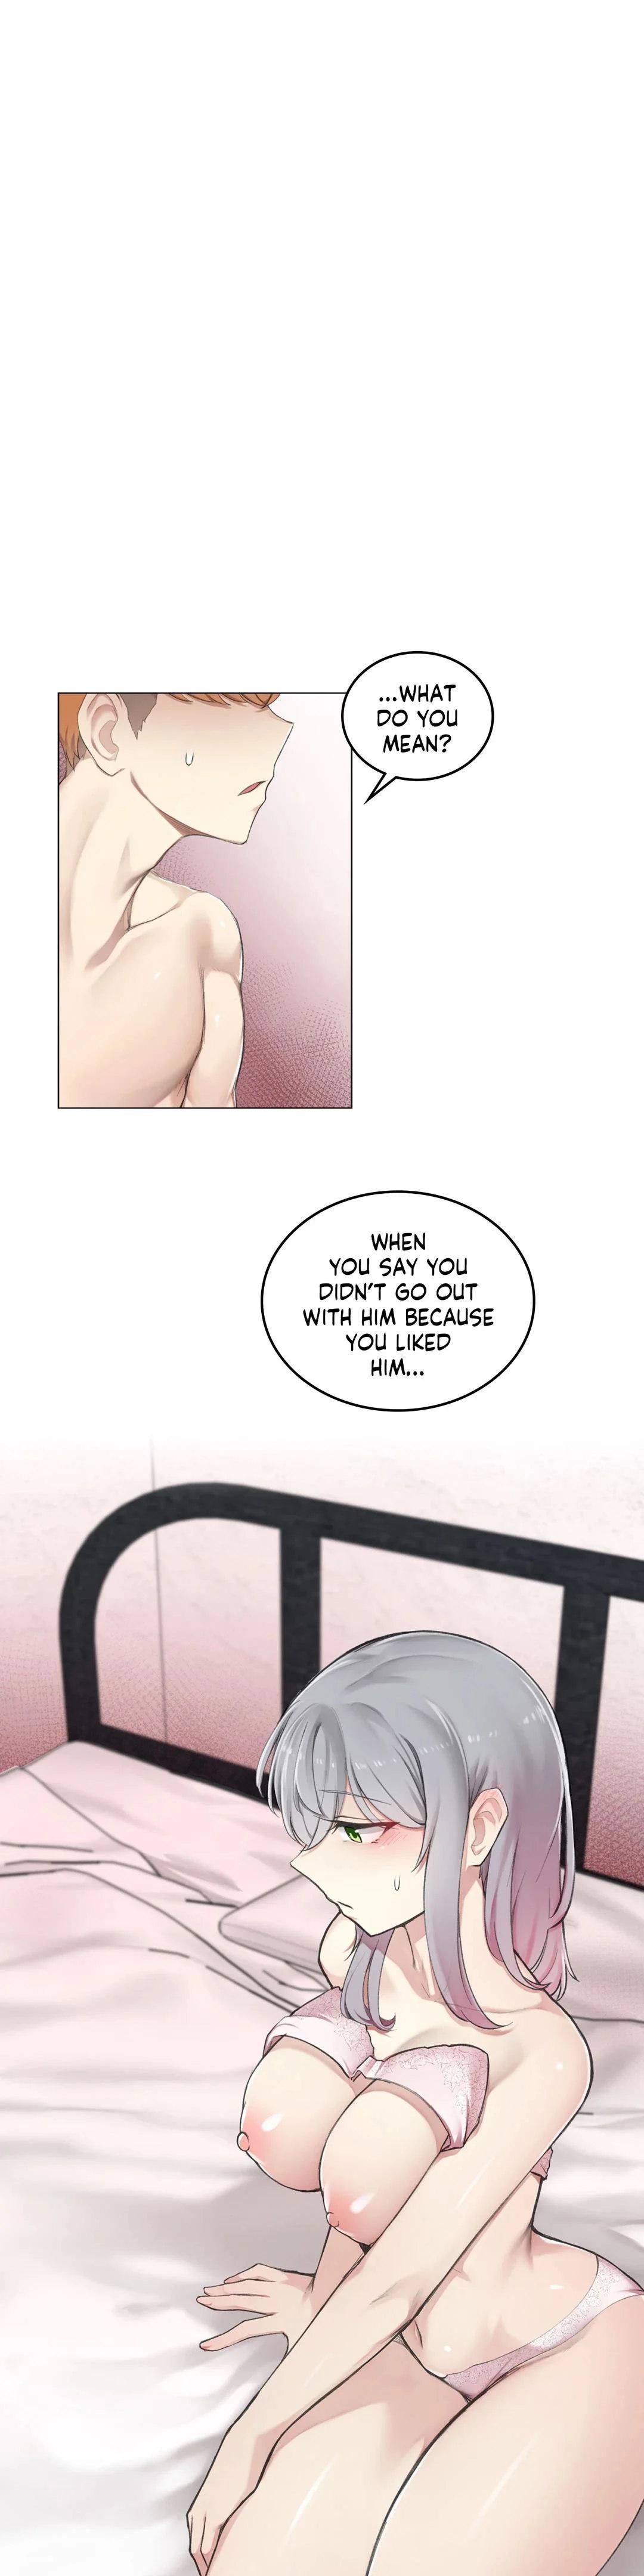 [Dumangoon, KONG_] Sexcape Room: Snap Off Ch.7/7 [English] [Manhwa PDF] Completed 168